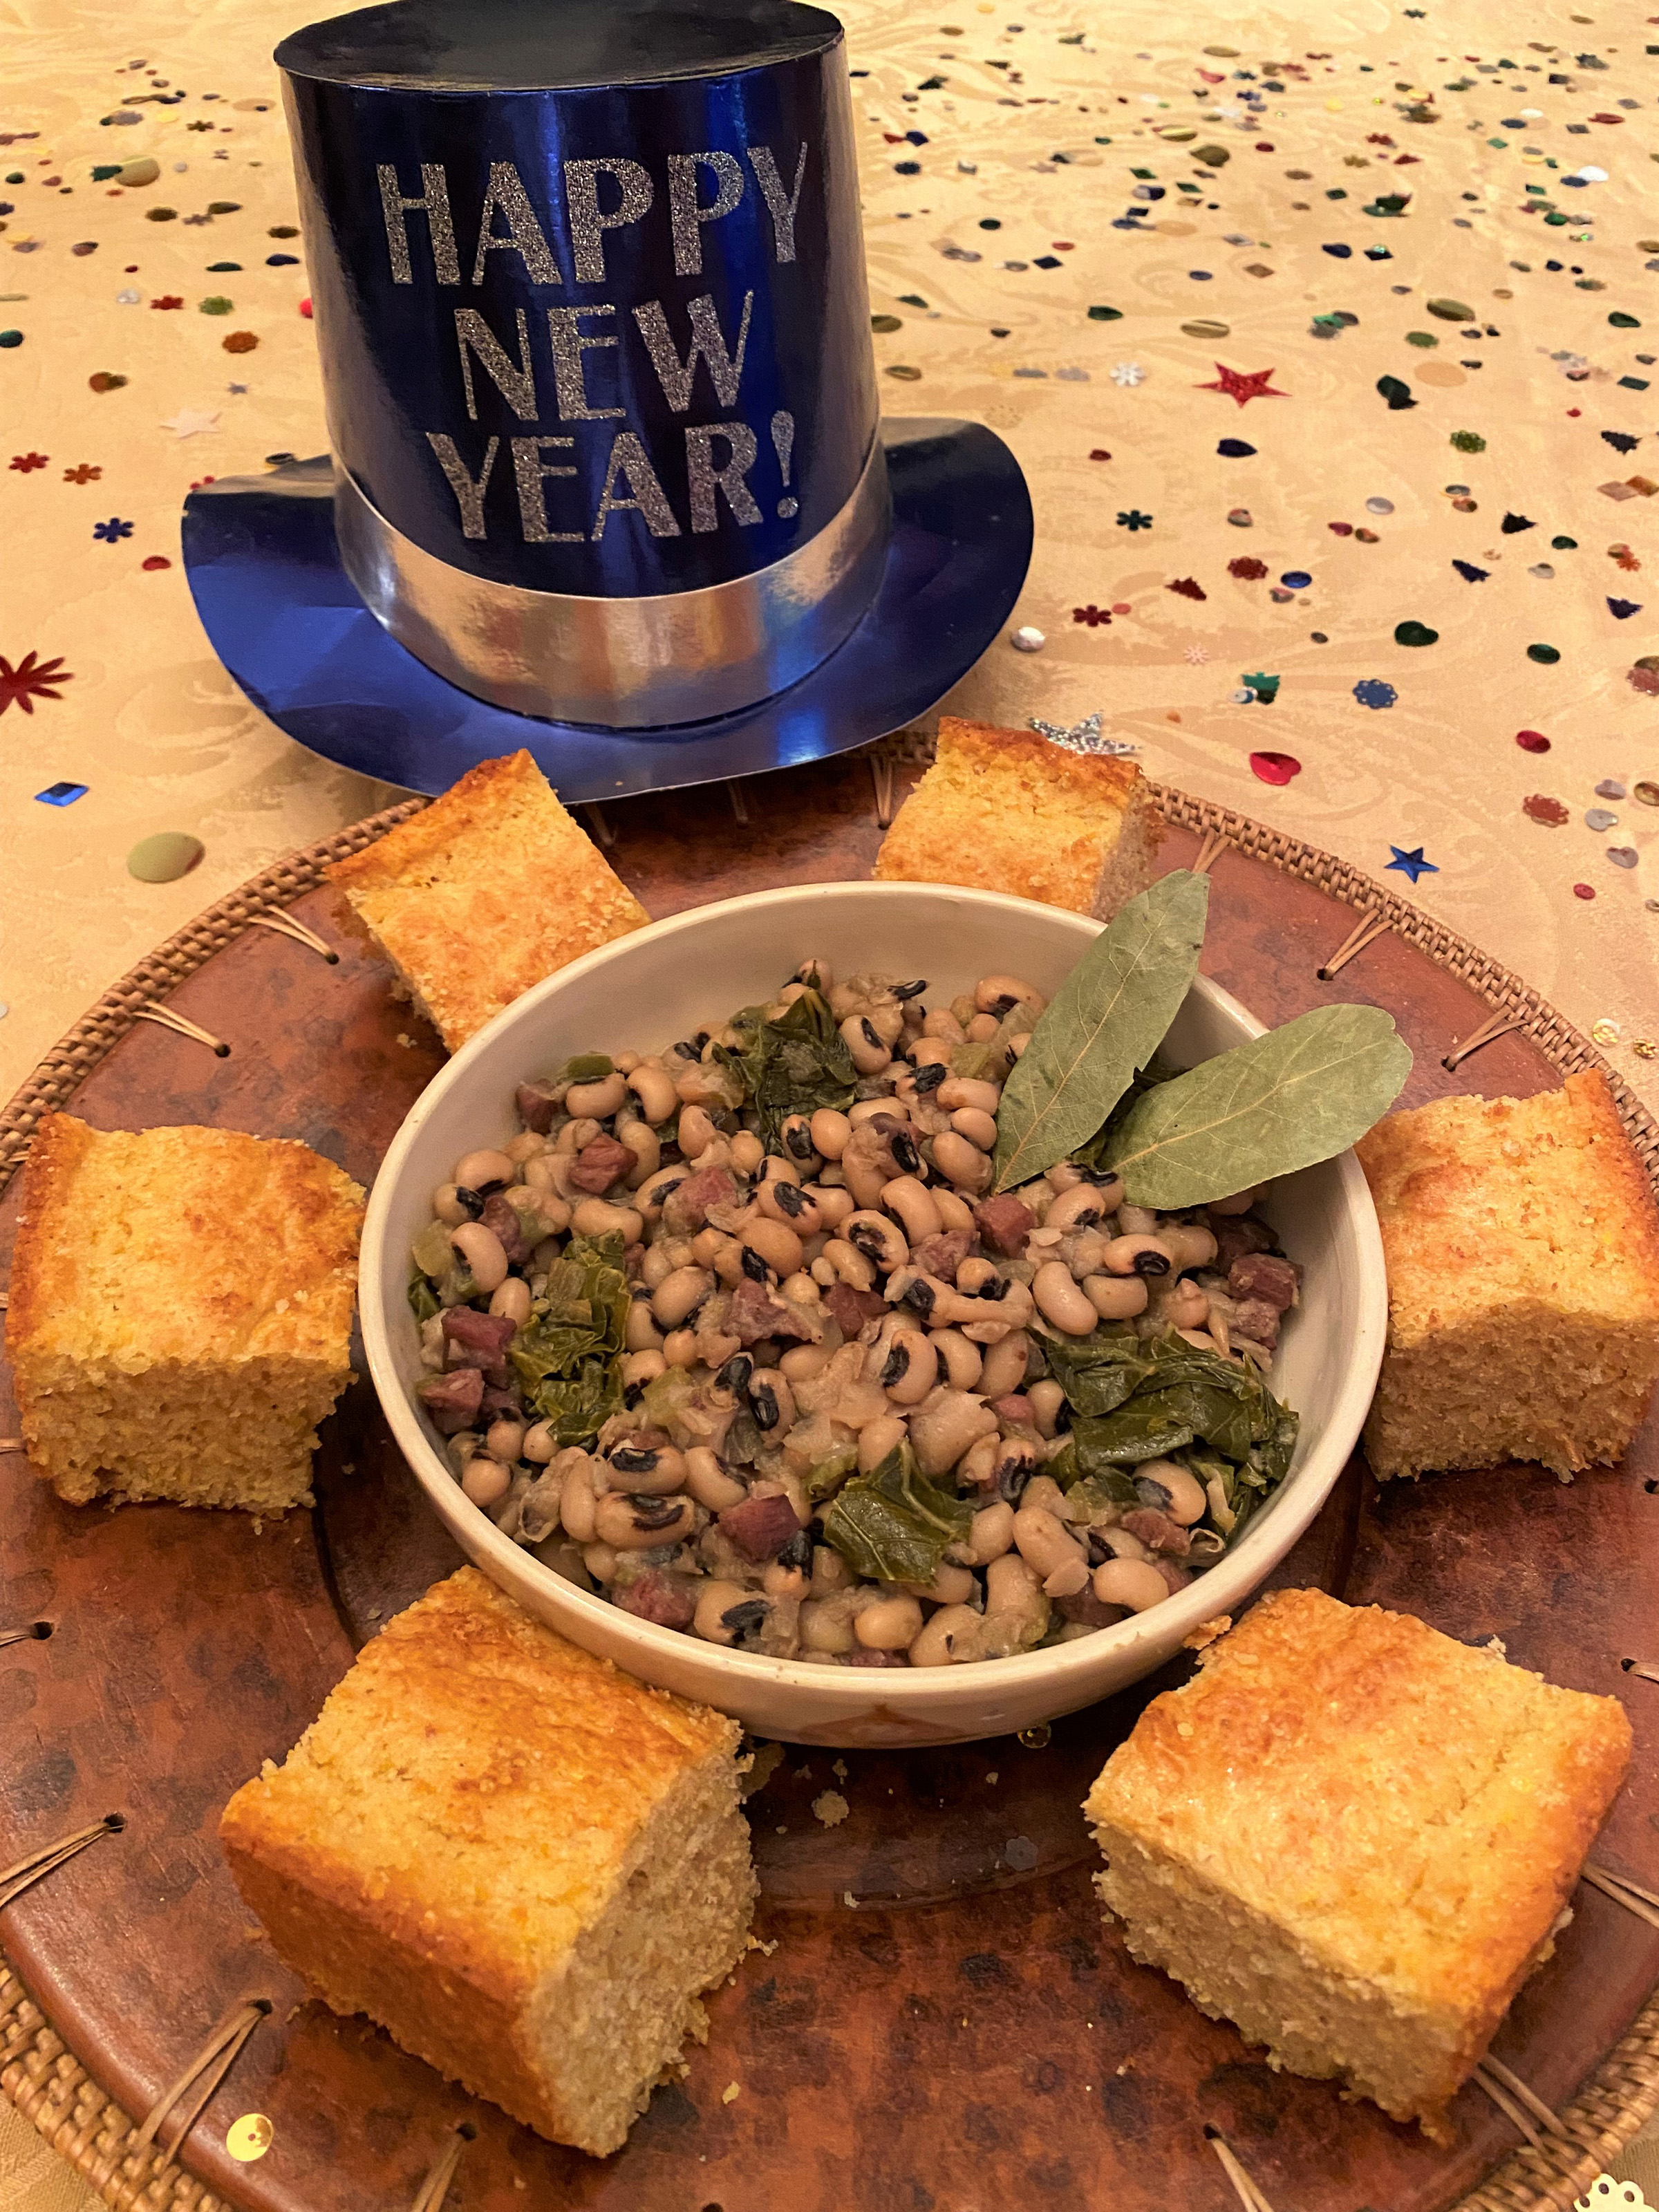 Open Eating black-eyed peas on New Year’s Day is said to bring luck and prosperity in the coming year. Photo by Michele Warmund.